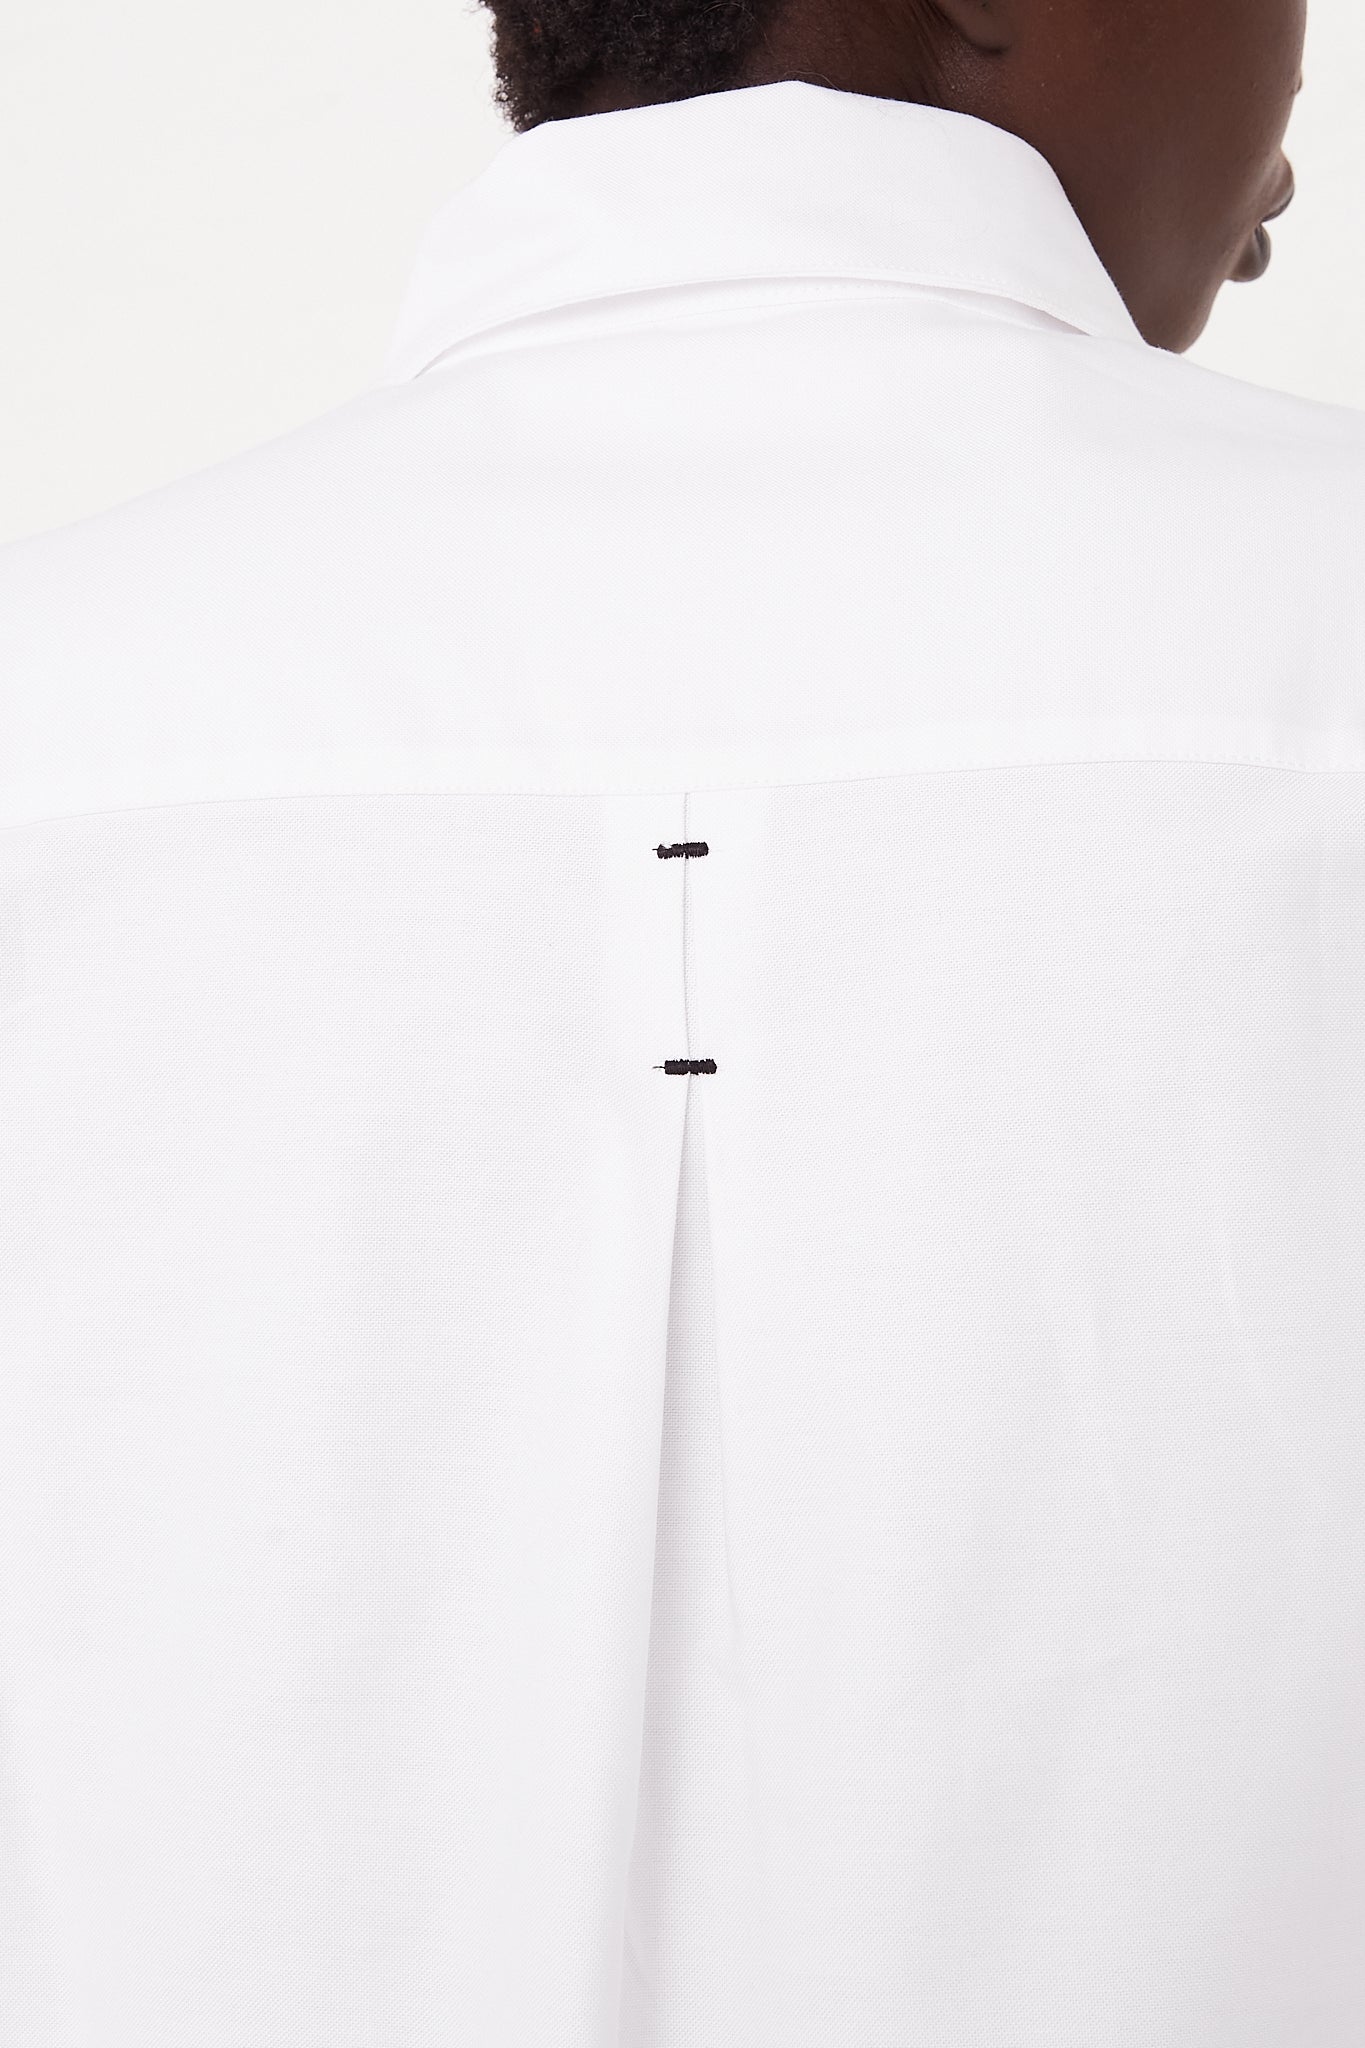 CORDERA Long Sleeve Shirt in White | Oroboro Store | Back view upclose showing back detail on model